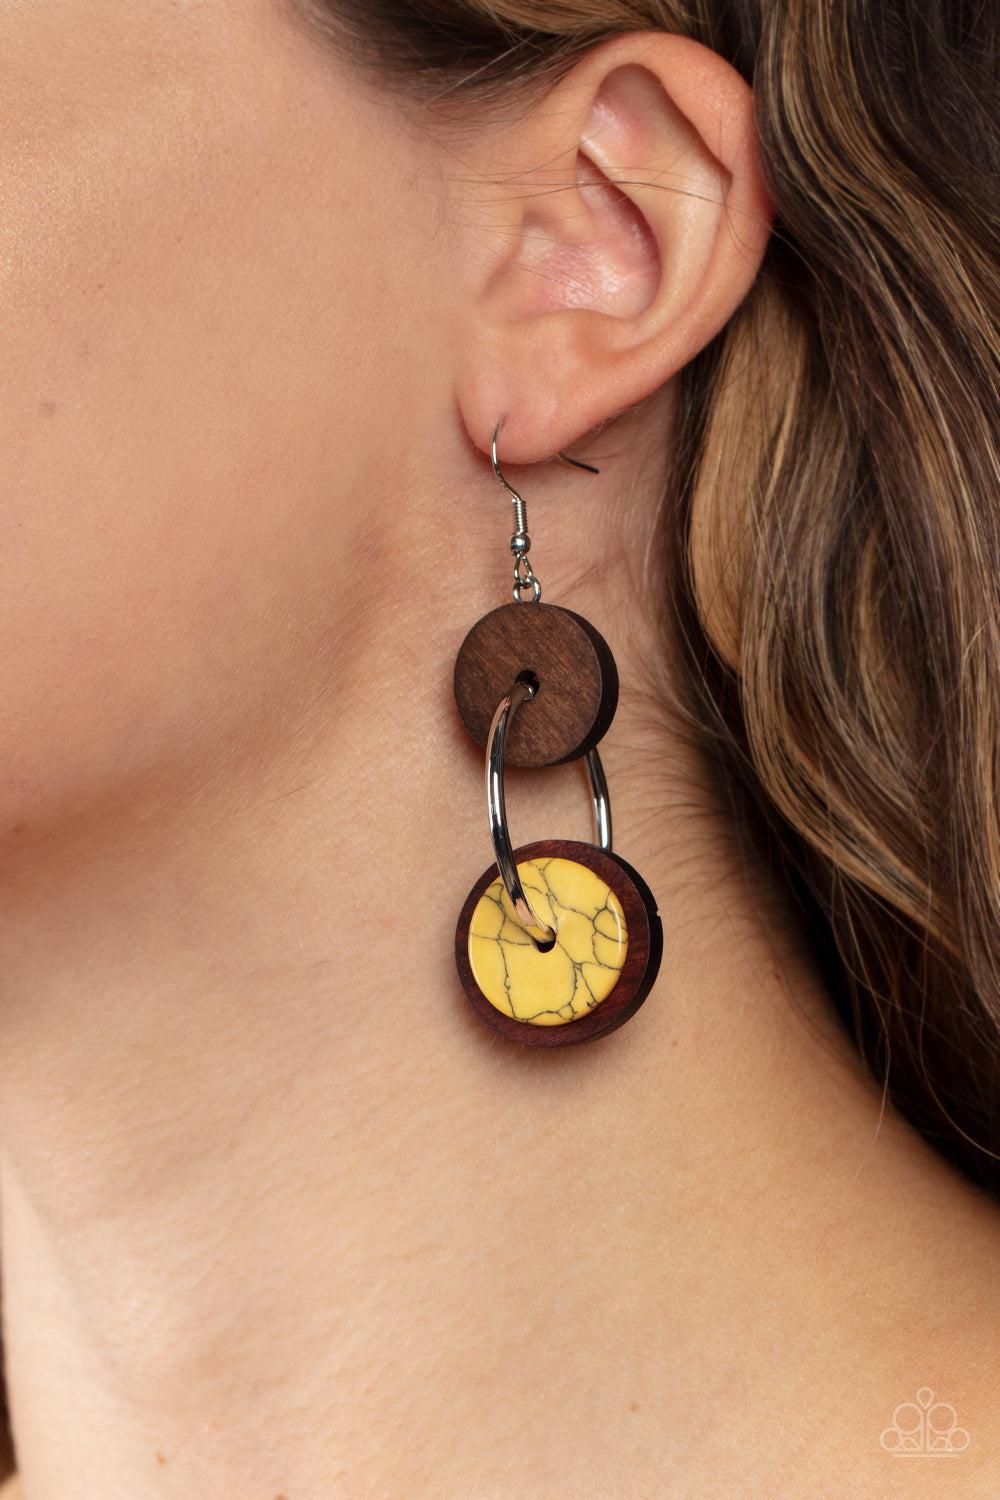 Artisanal Aesthetic Yellow Stone and Brown Wood Earrings - Paparazzi Accessories-on model - CarasShop.com - $5 Jewelry by Cara Jewels